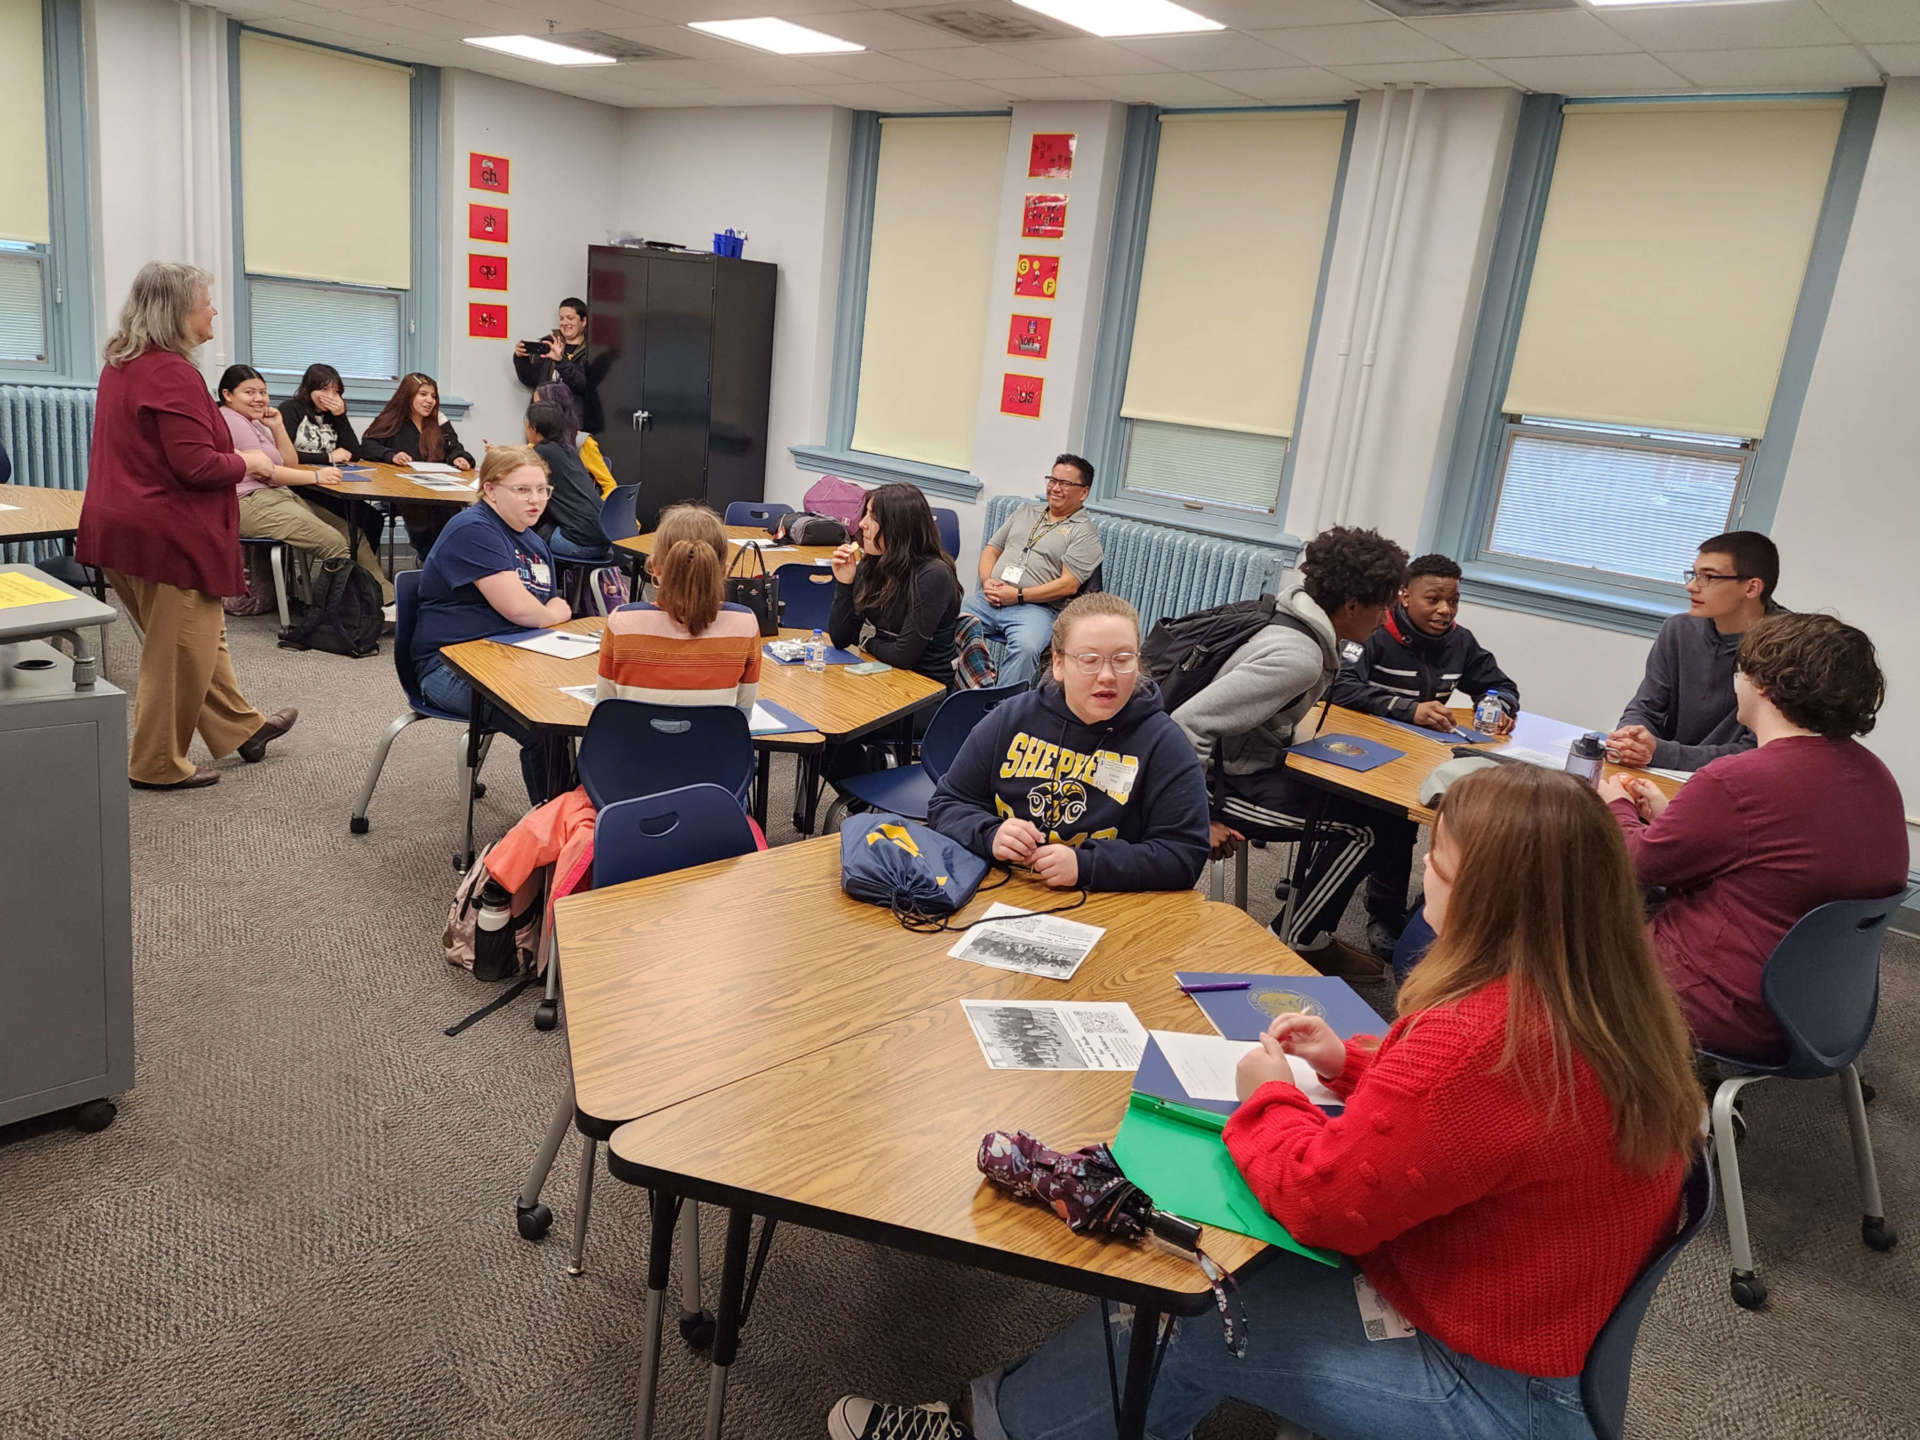 High school students in a classroom attending School of Education open house.